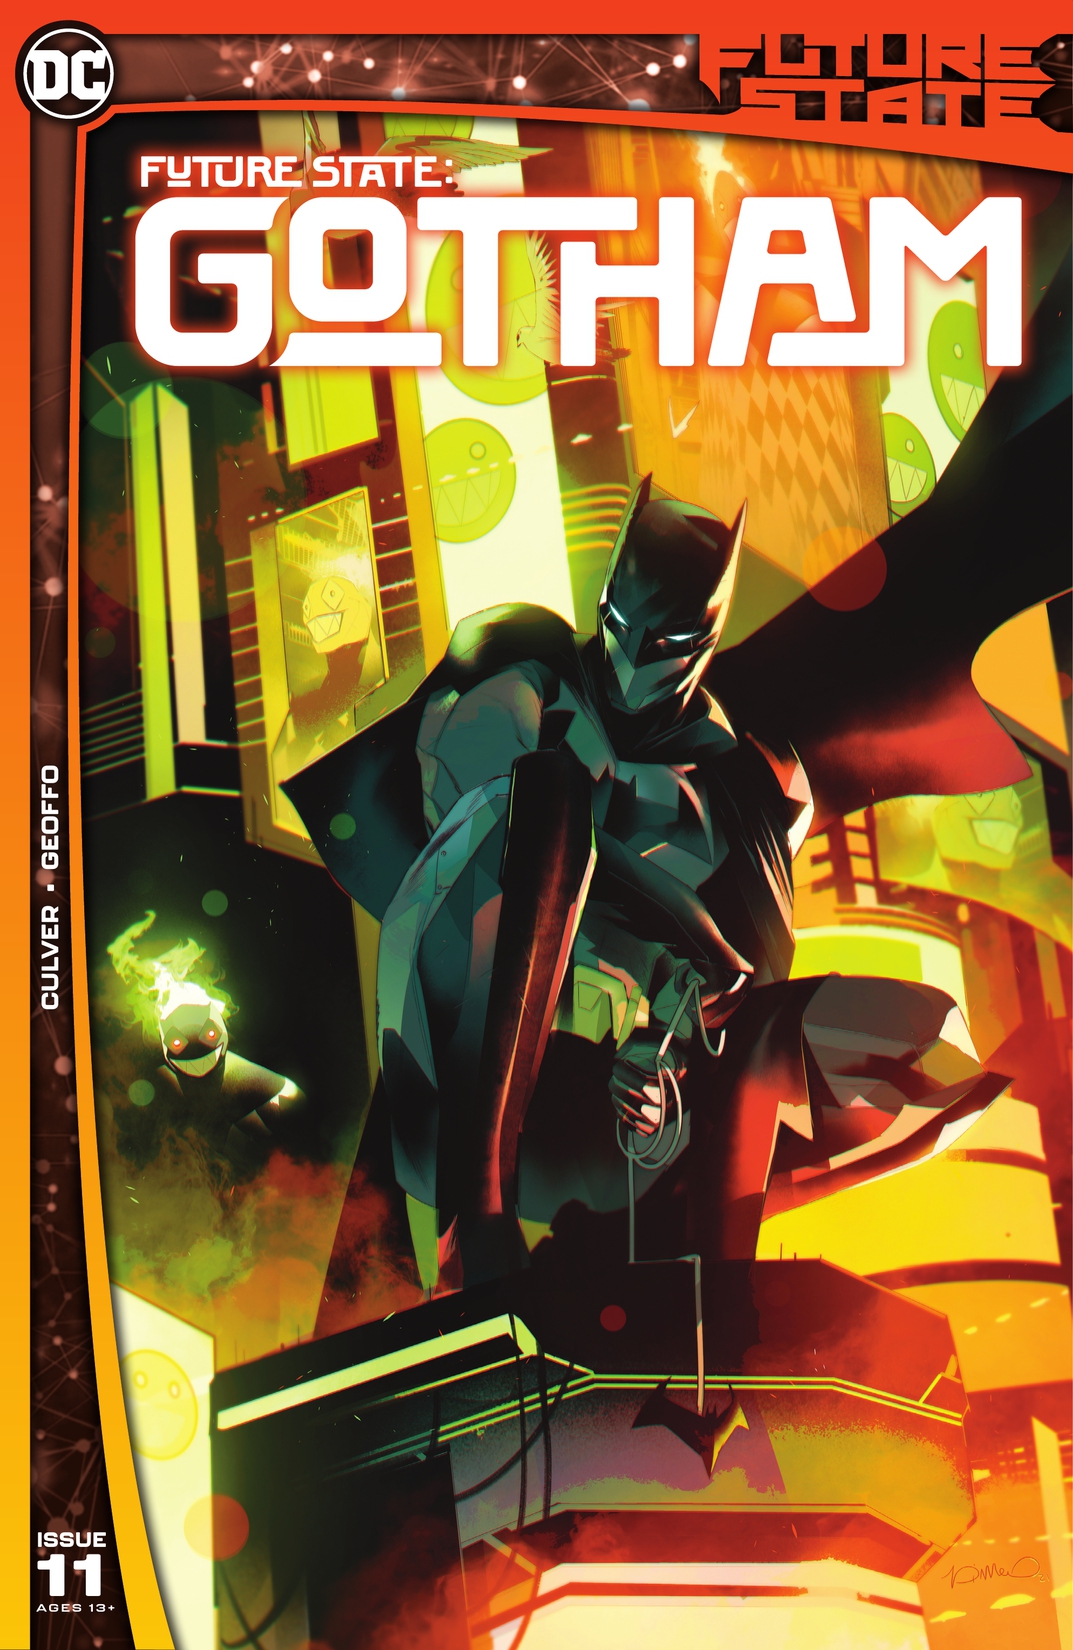 Future State: Gotham #11 preview images